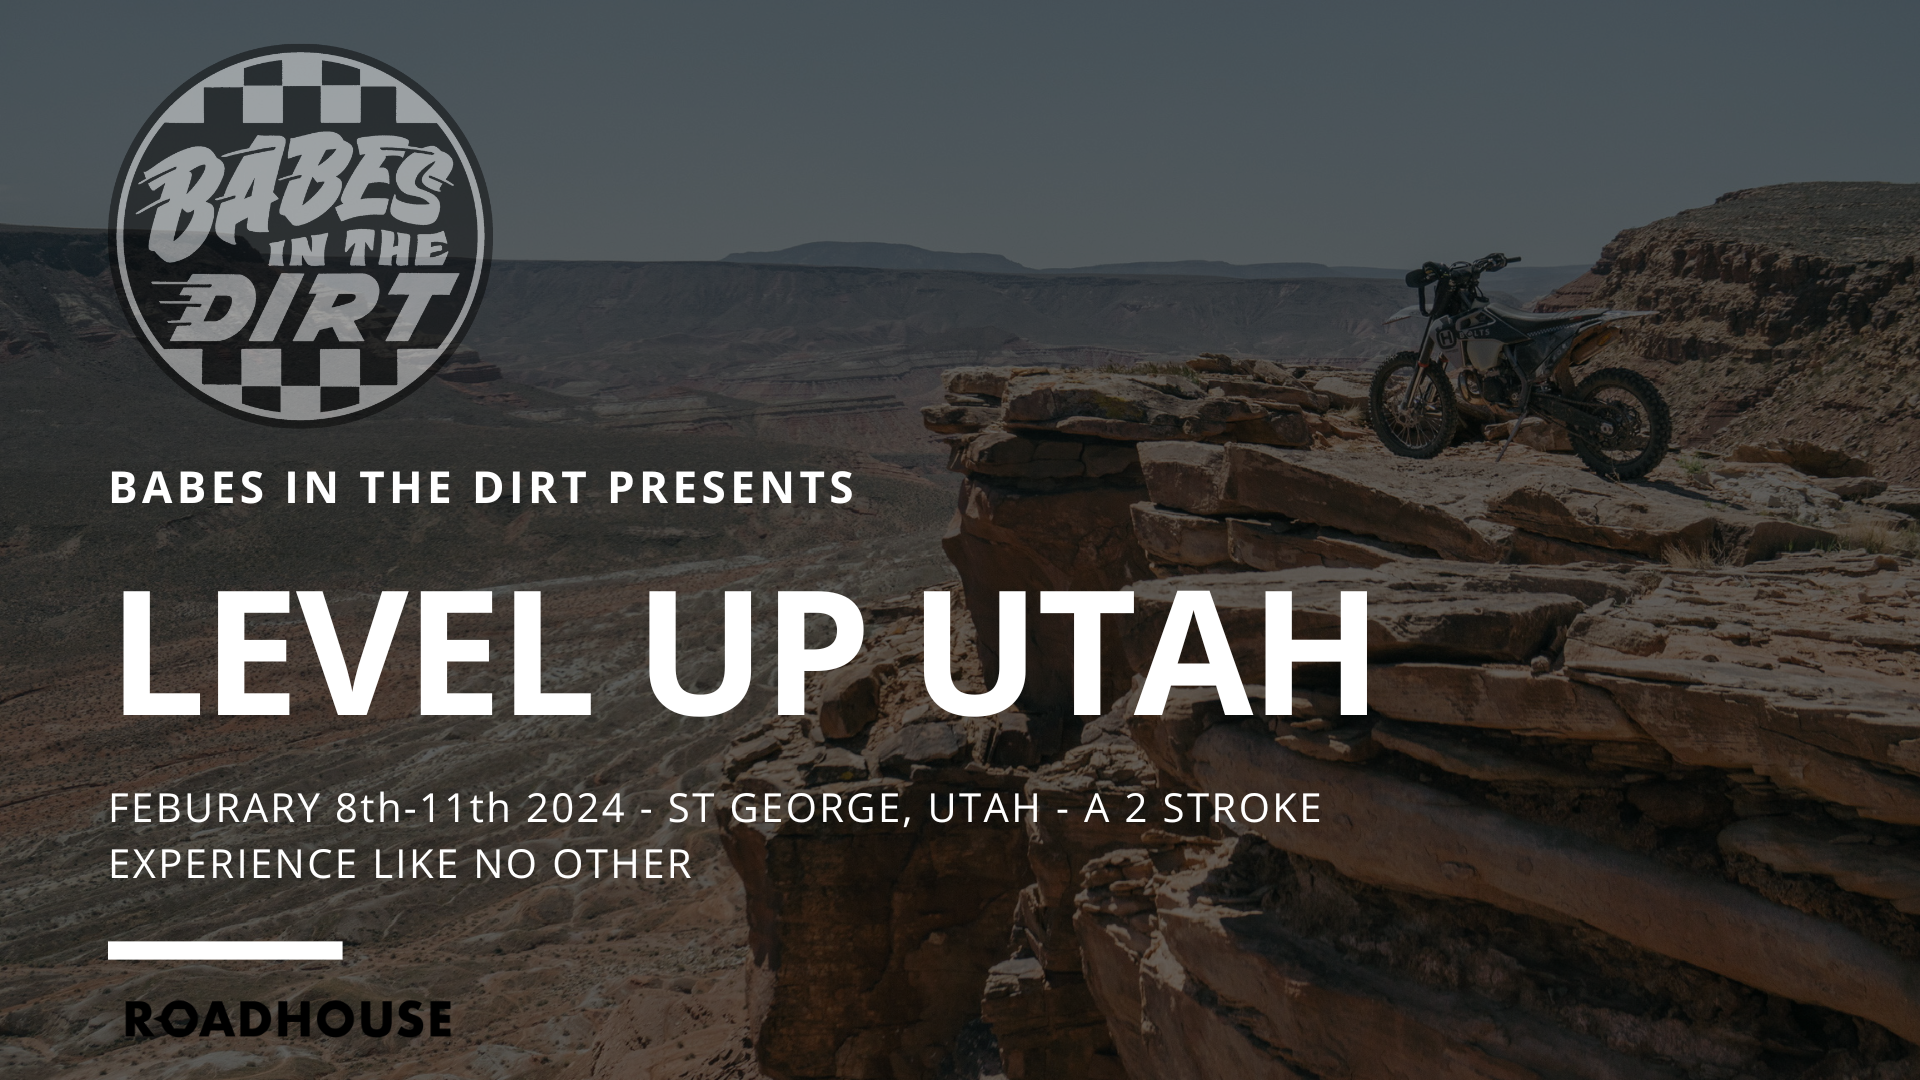 Level Up Utah - Babes in the Dirt's Adventure Series Kicks Off Feb 8th -11th